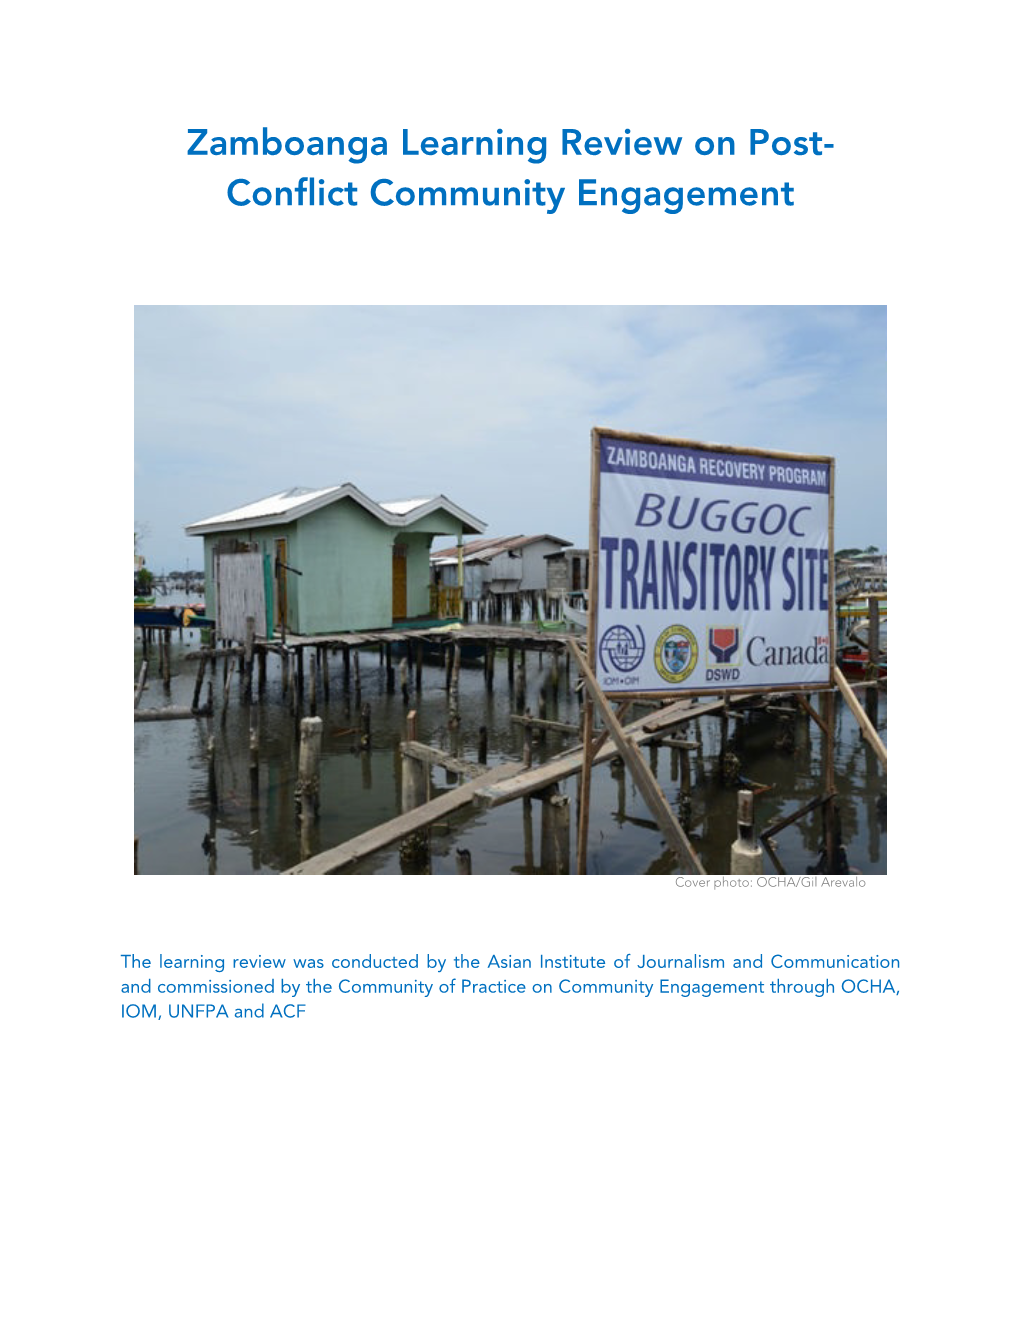 Zamboanga Learning Review on Post-Conflict Community Engagement